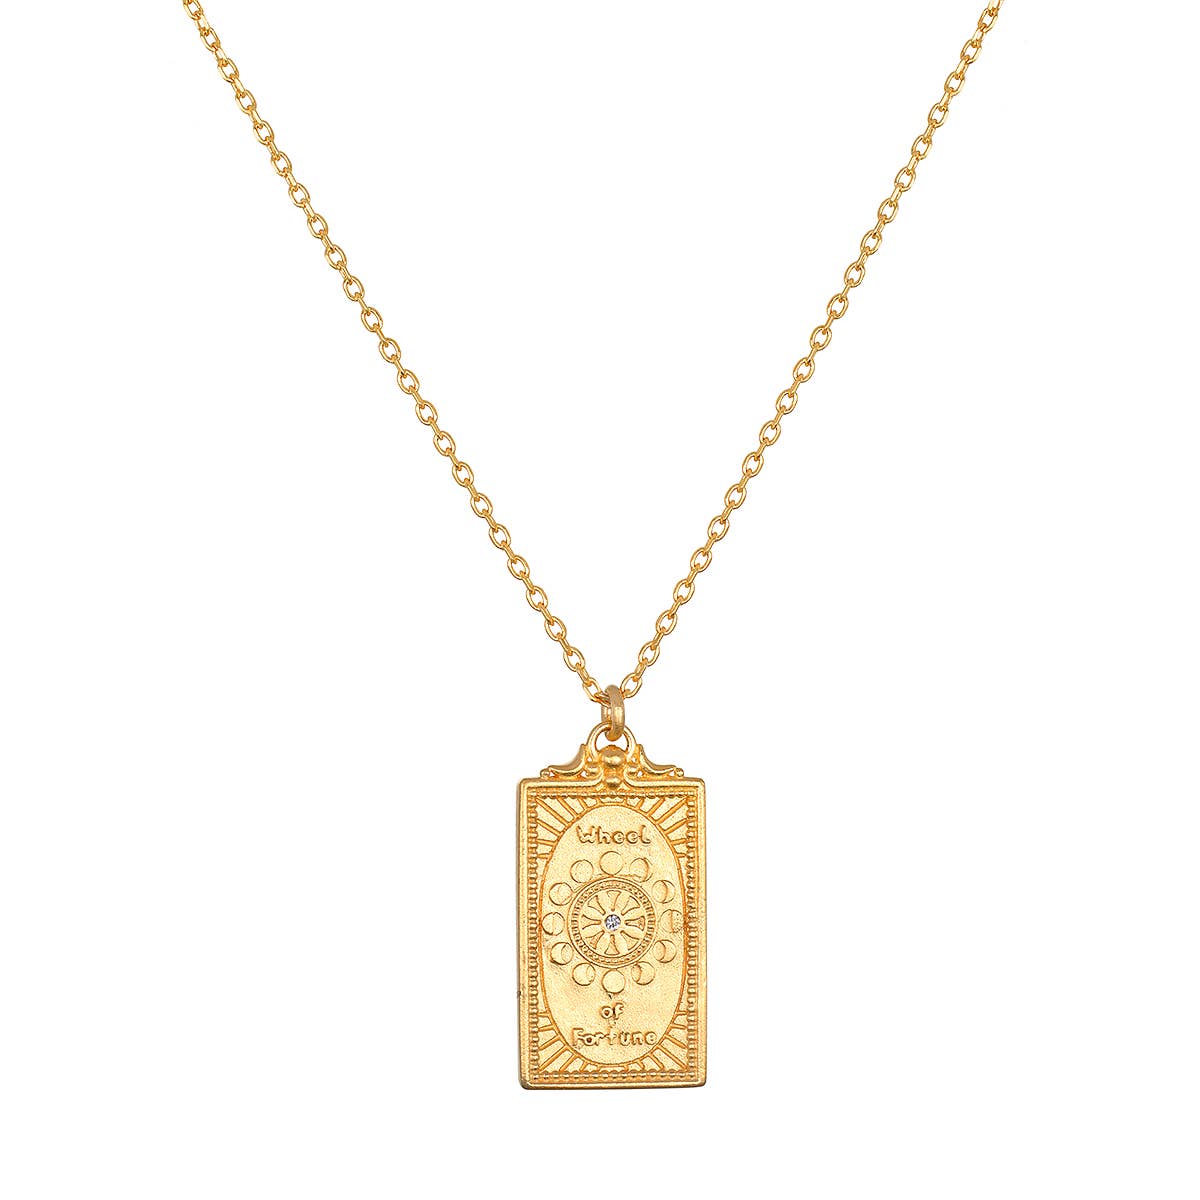 18" Wheel of Fortune tarot card necklace